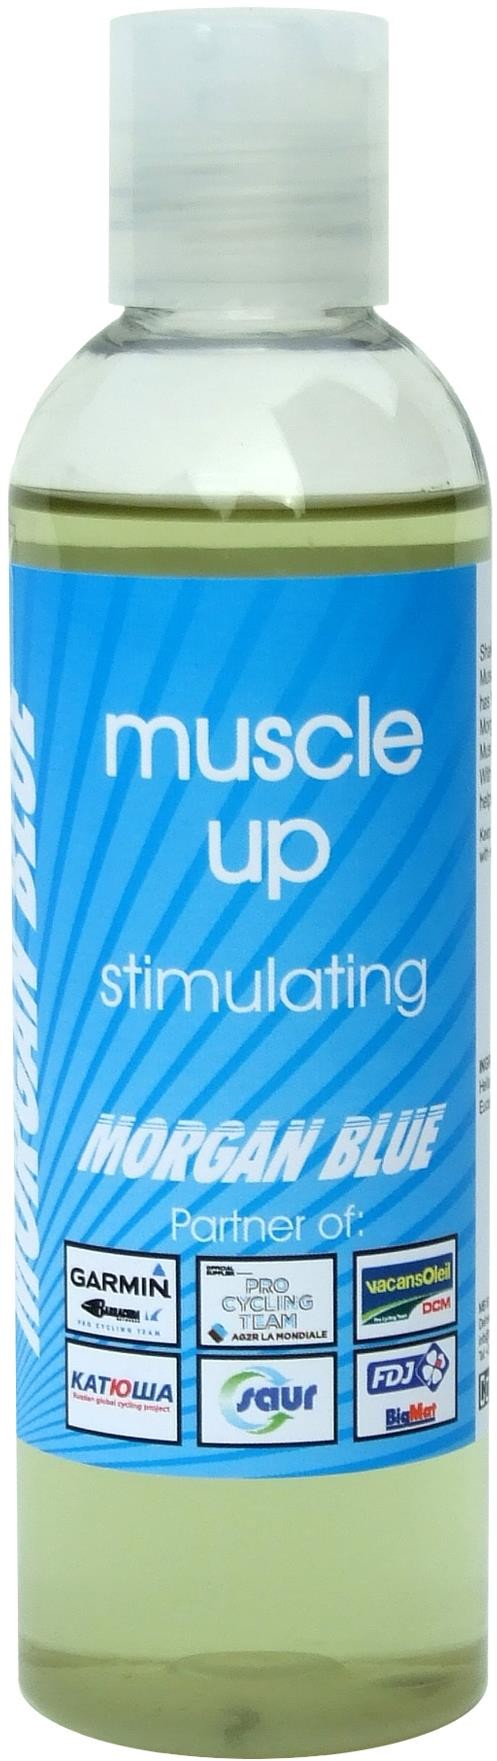 Muscle Up Oil image 0